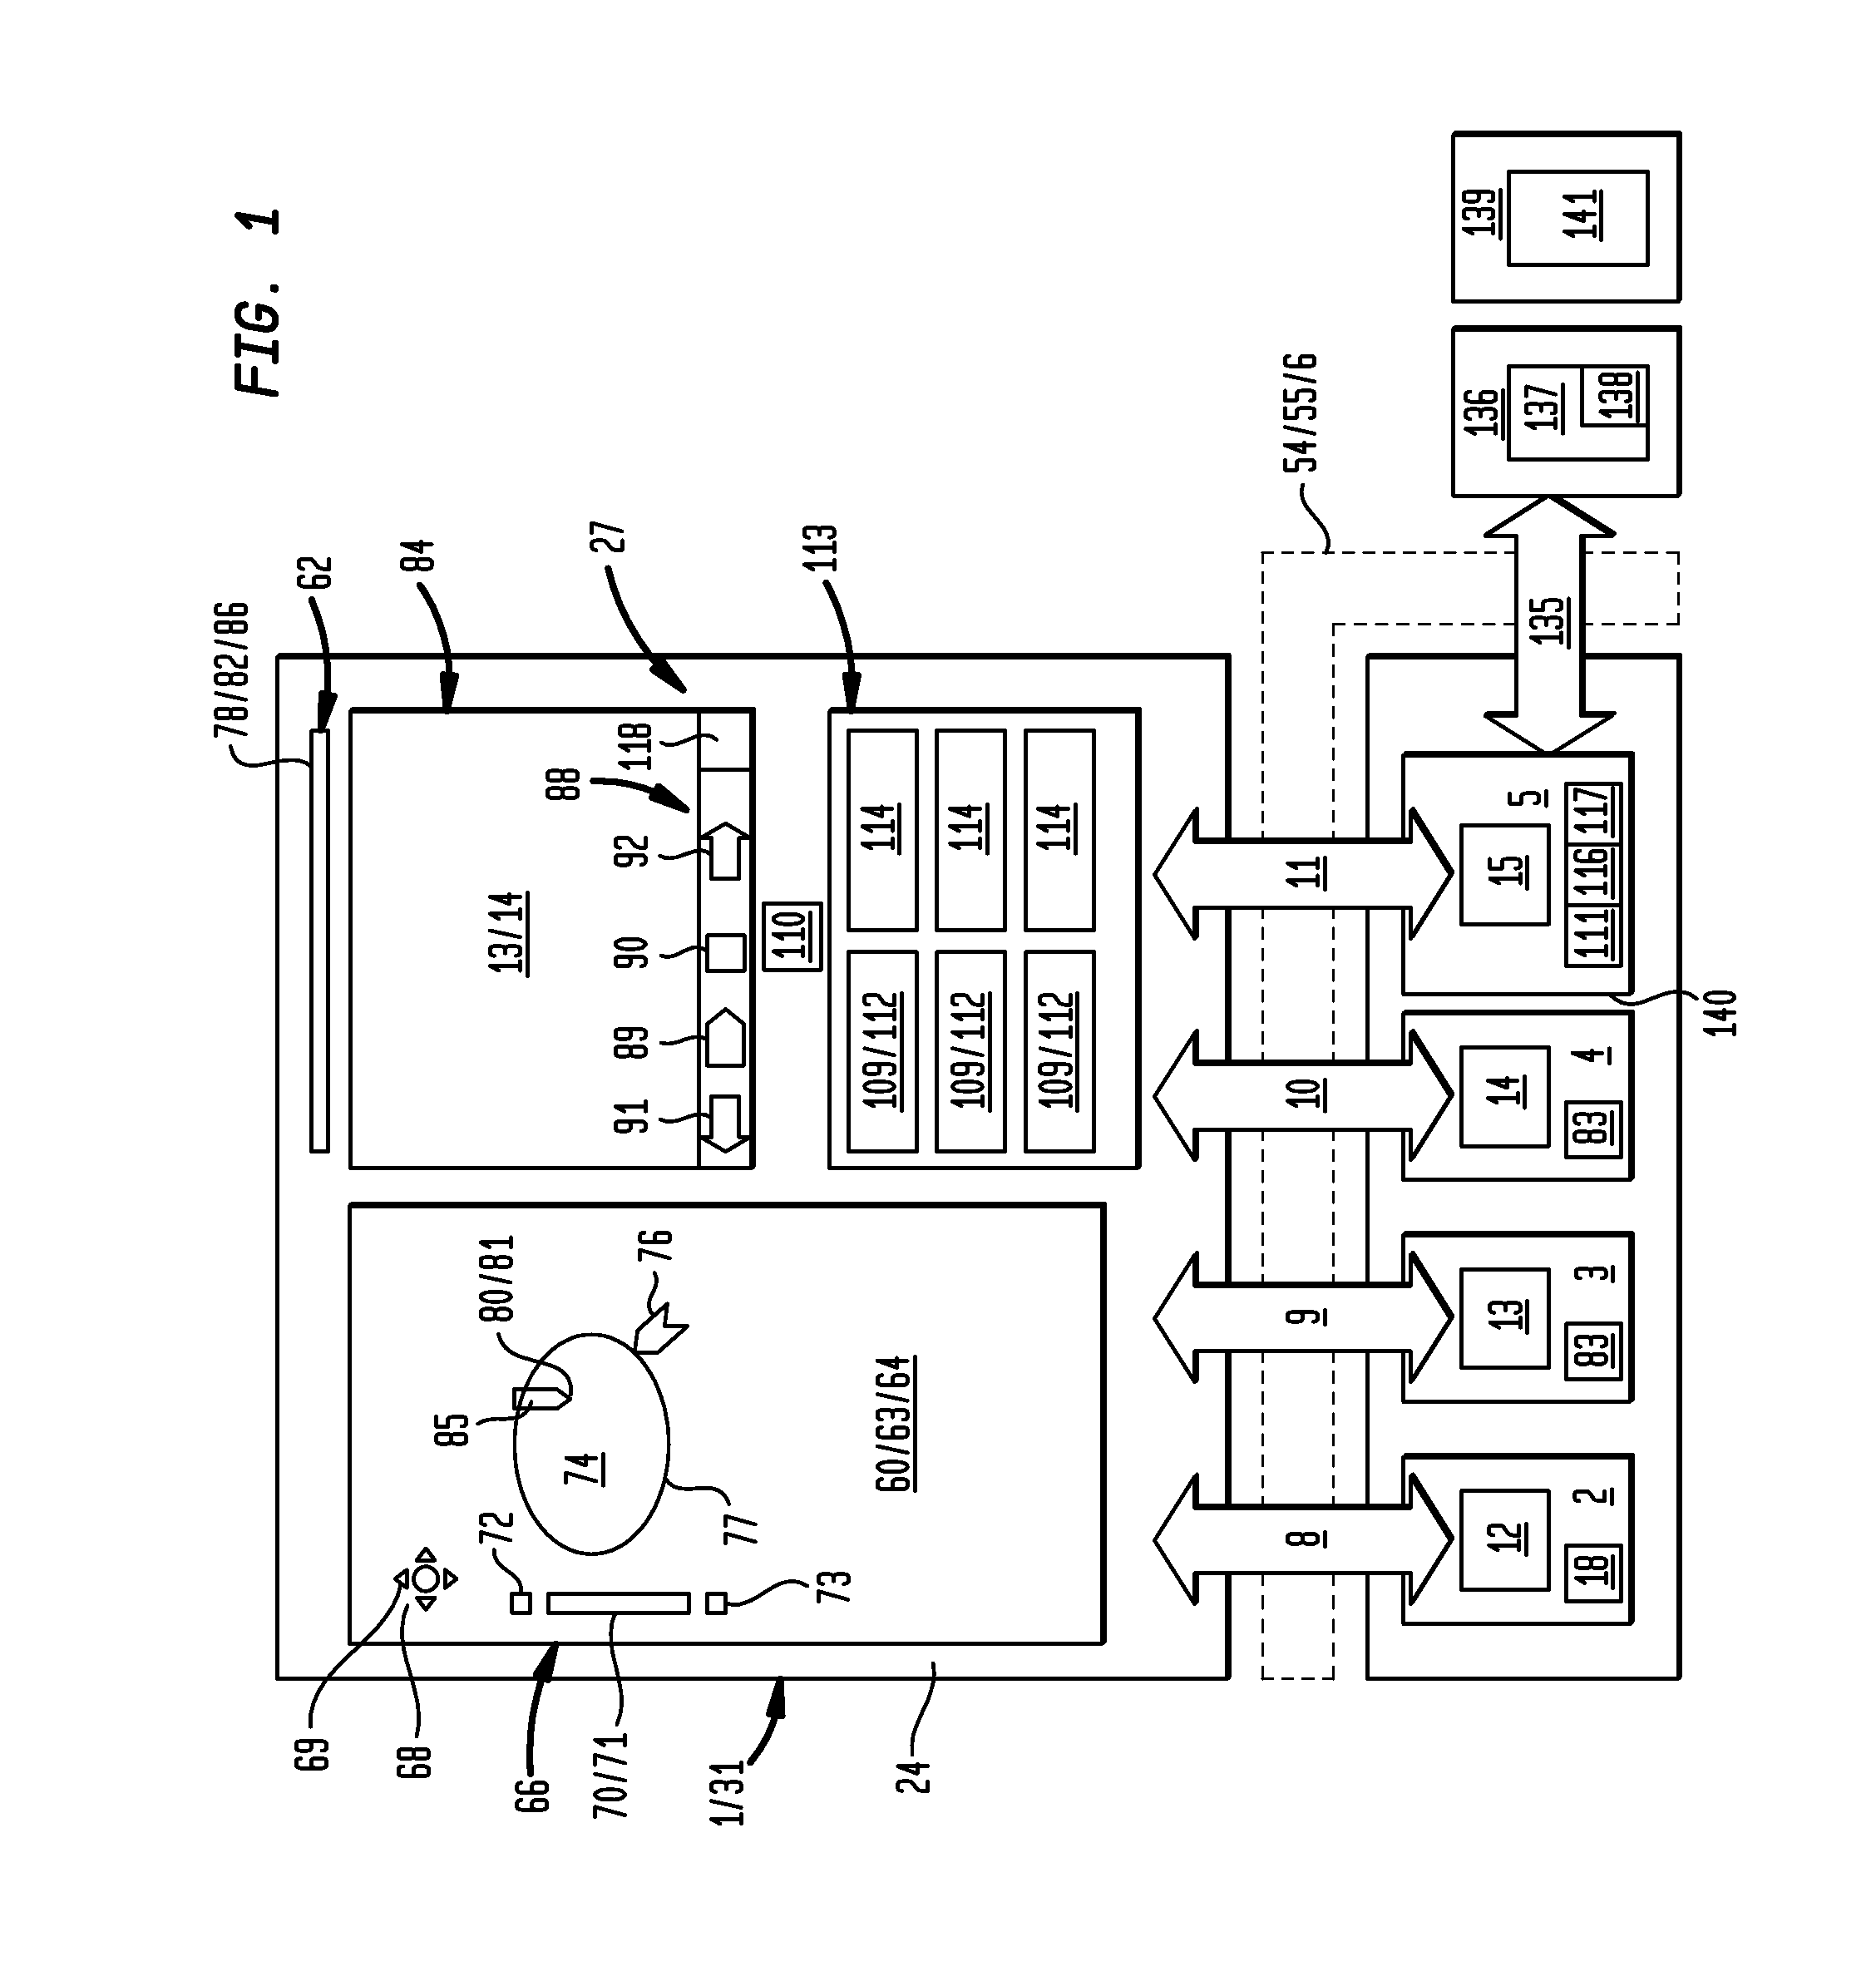 Interactive Image Display and Selection System